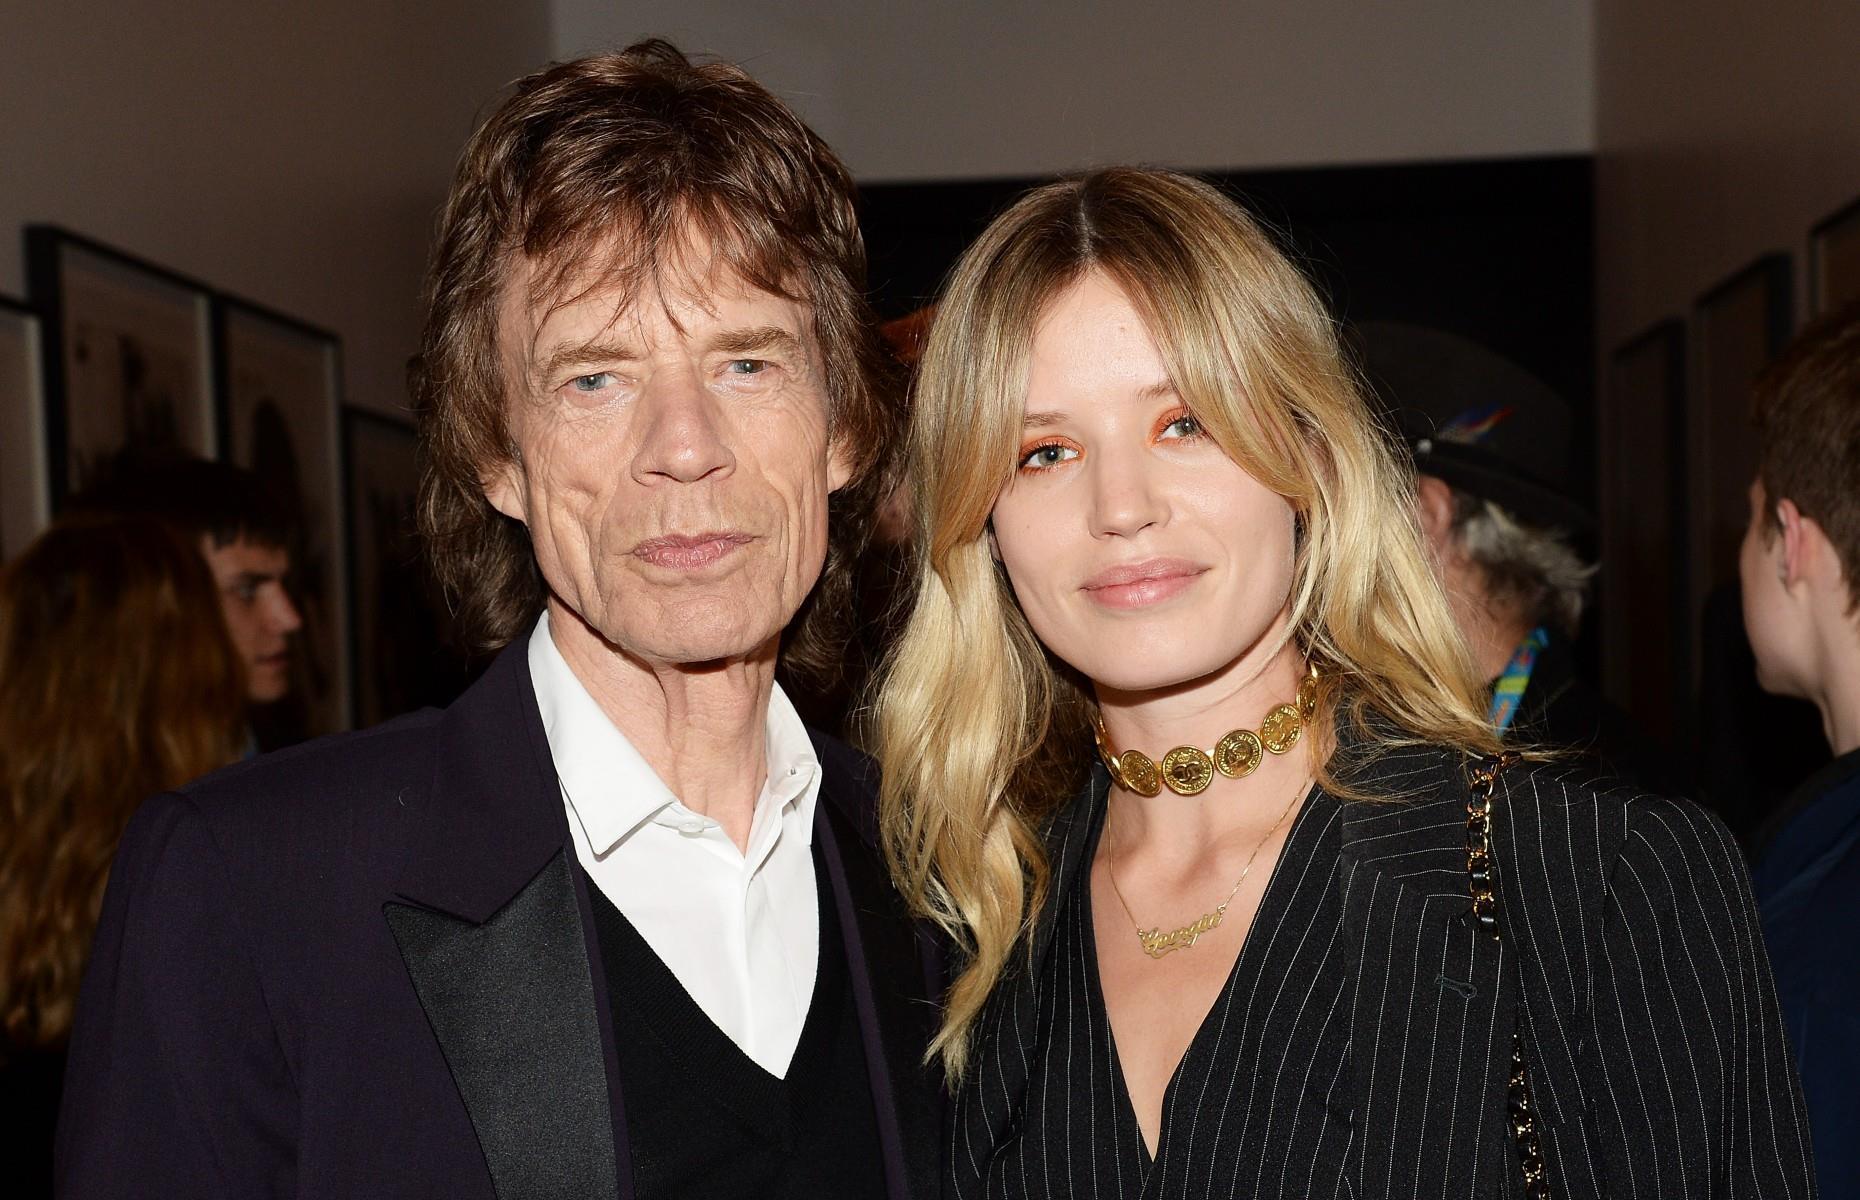 What Mick Jagger's eight kids do and how much they're worth